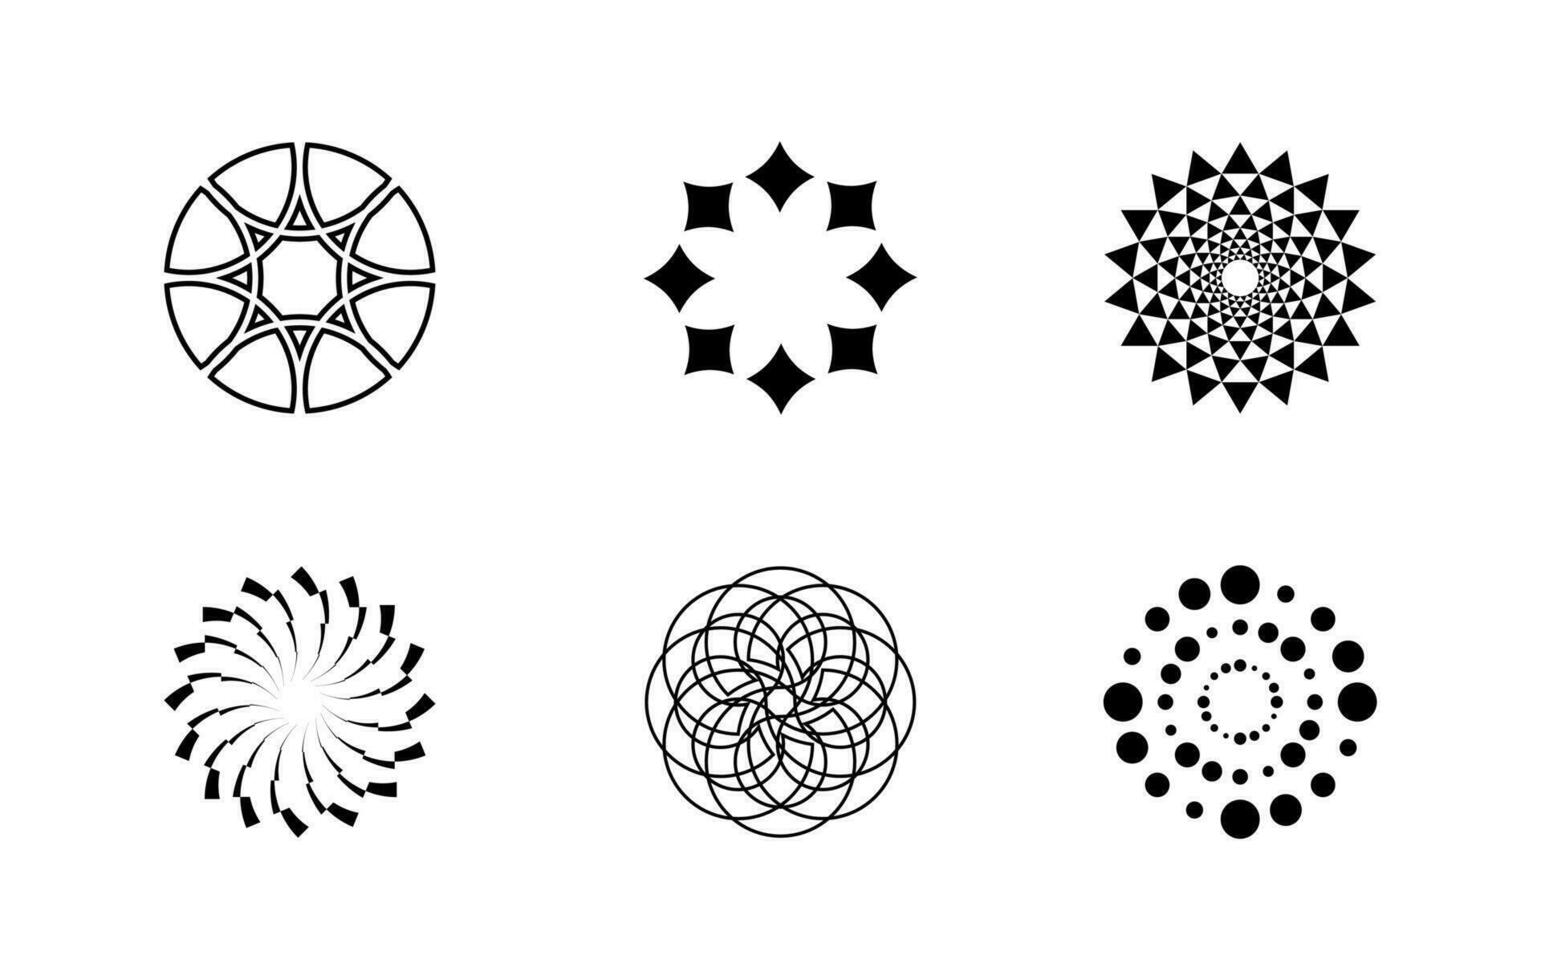 Daisy floral icon. Black flowers and shapes icons. organic form cloud star and other elements in trendy playful brutal style. Vector illustrations isolated.